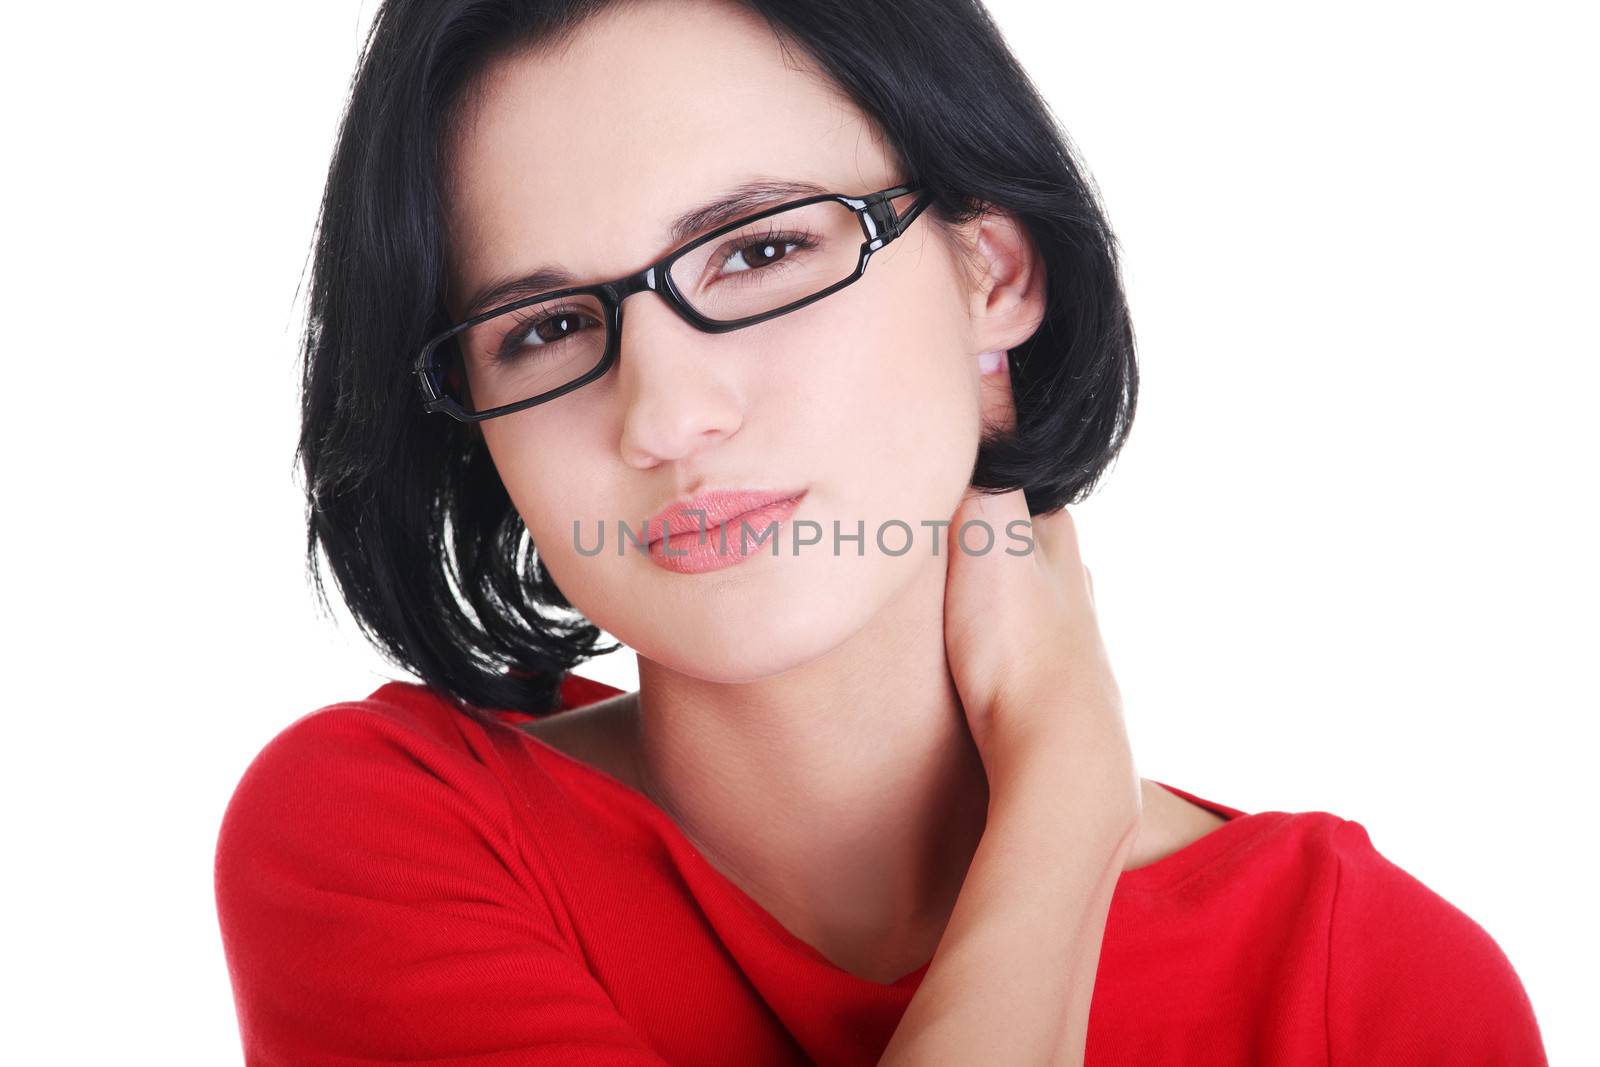 Young woman holding hand on her neck. Neck pain concept